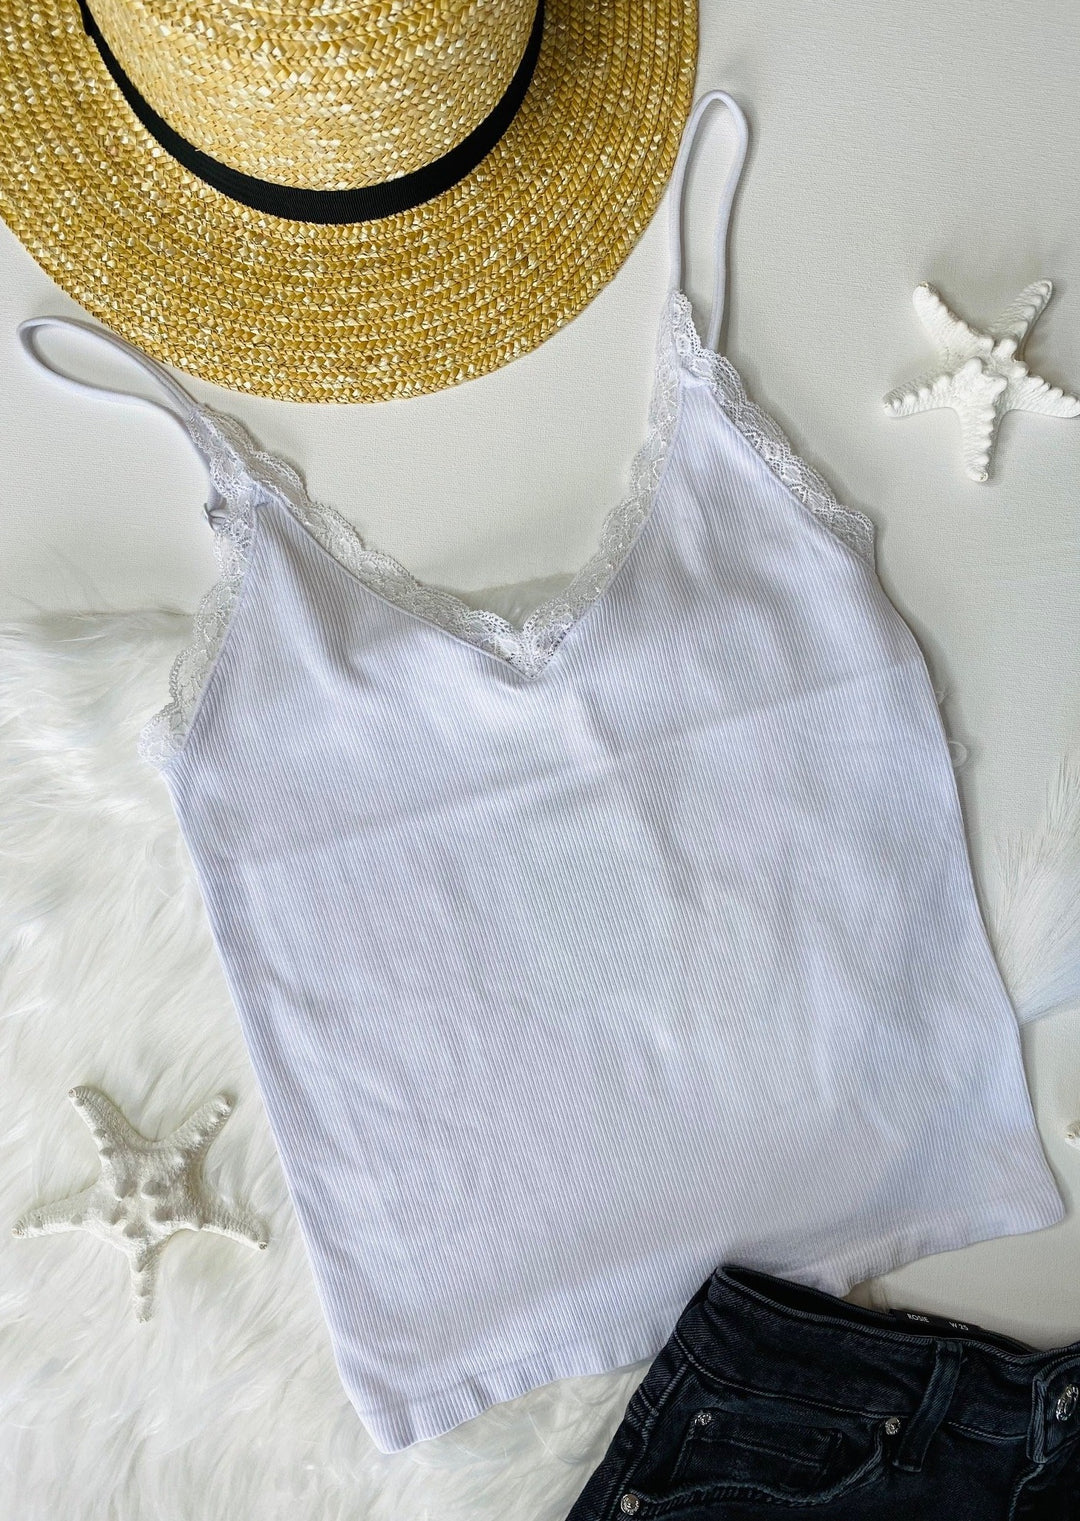 BAMBOO WHITE LACE TRIM TANK TOP